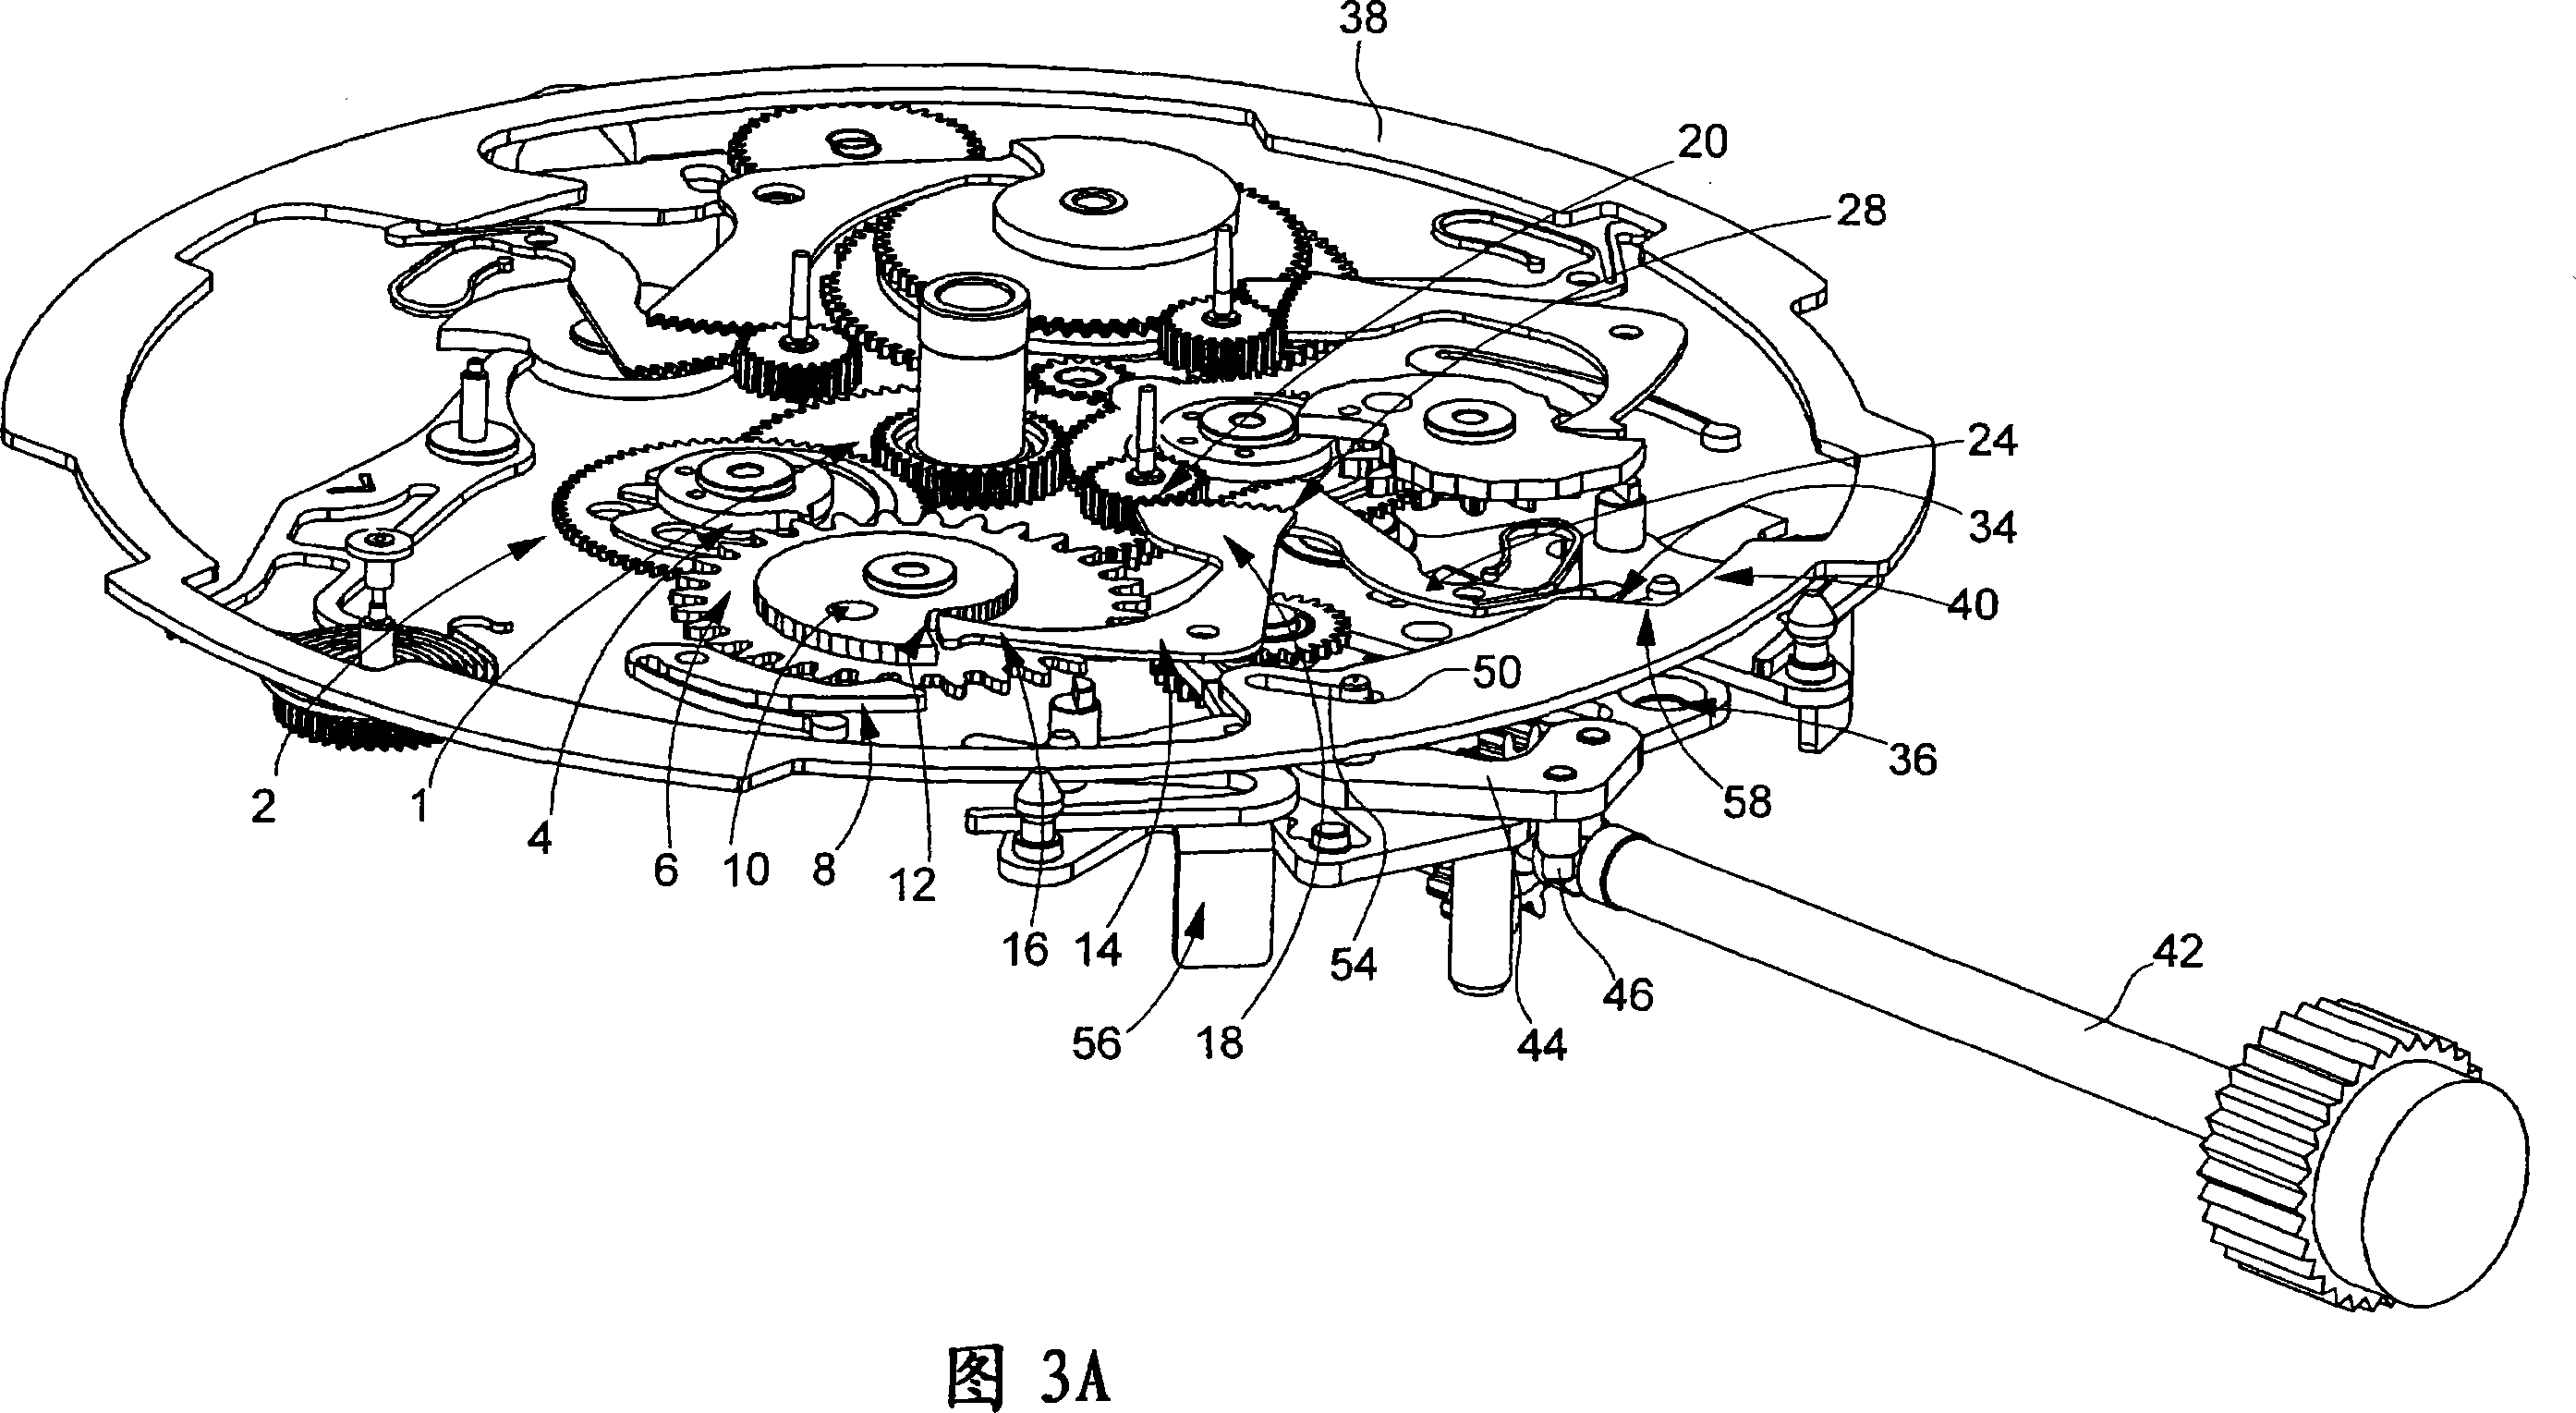 Timepiece including a correction mechanism for a device displaying a time quantity